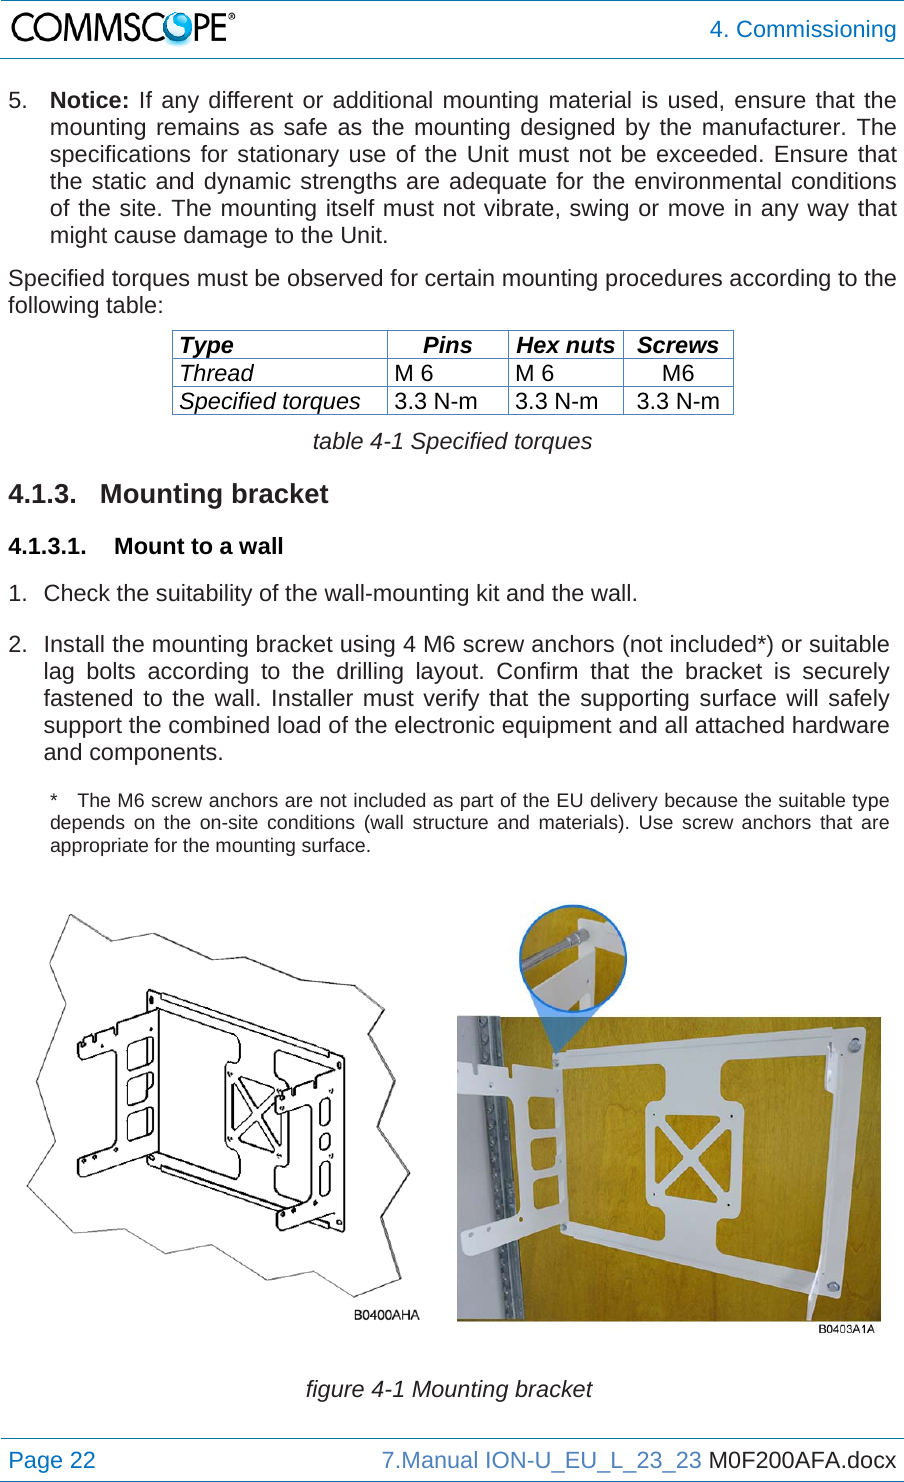  4. Commissioning Page 22  7.Manual ION-U_EU_L_23_23 M0F200AFA.docx  5.  Notice: If any different or additional mounting material is used, ensure that the mounting remains as safe as the mounting designed by the manufacturer. The specifications for stationary use of the Unit must not be exceeded. Ensure that the static and dynamic strengths are adequate for the environmental conditions of the site. The mounting itself must not vibrate, swing or move in any way that might cause damage to the Unit. Specified torques must be observed for certain mounting procedures according to the following table: Type Pins Hex nuts Screws Thread M 6  M 6  M6 Specified torques 3.3 N-m  3.3 N-m  3.3 N-m table 4-1 Specified torques 4.1.3. Mounting bracket 4.1.3.1.  Mount to a wall  1.  Check the suitability of the wall-mounting kit and the wall.  2.  Install the mounting bracket using 4 M6 screw anchors (not included*) or suitable lag bolts according to the drilling layout. Confirm that the bracket is securely fastened to the wall. Installer must verify that the supporting surface will safely support the combined load of the electronic equipment and all attached hardware and components. *  The M6 screw anchors are not included as part of the EU delivery because the suitable type depends on the on-site conditions (wall structure and materials). Use screw anchors that are appropriate for the mounting surface.  figure 4-1 Mounting bracket 